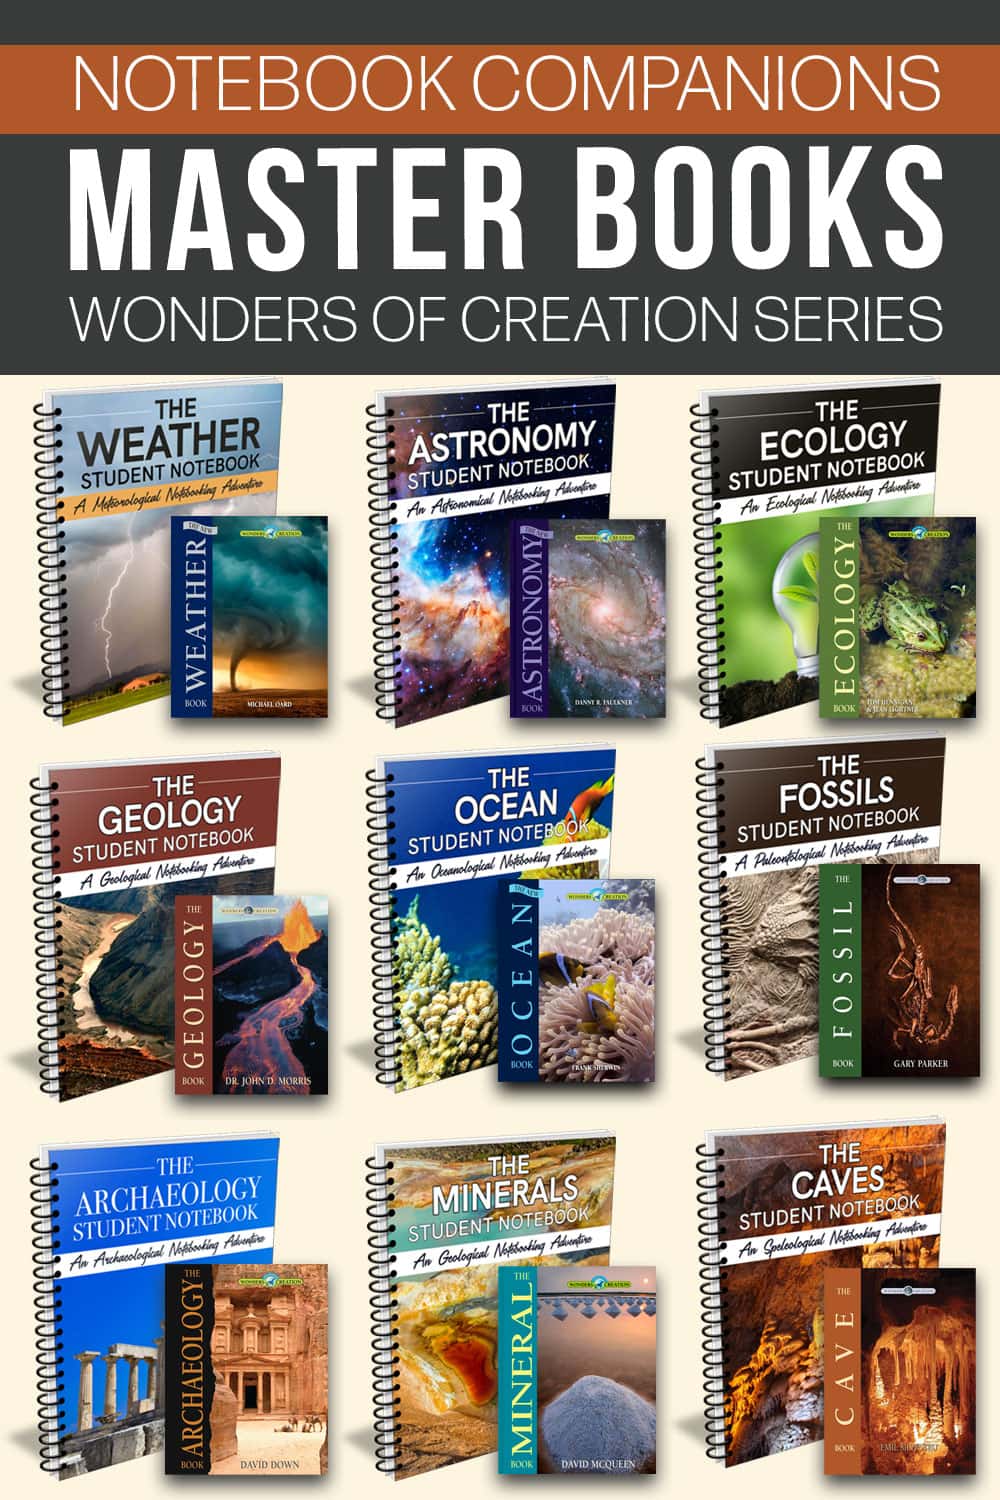 Notebook Companions for the Master Books Wonders of Creation Series - pictures of spiral notebooks and hardback books